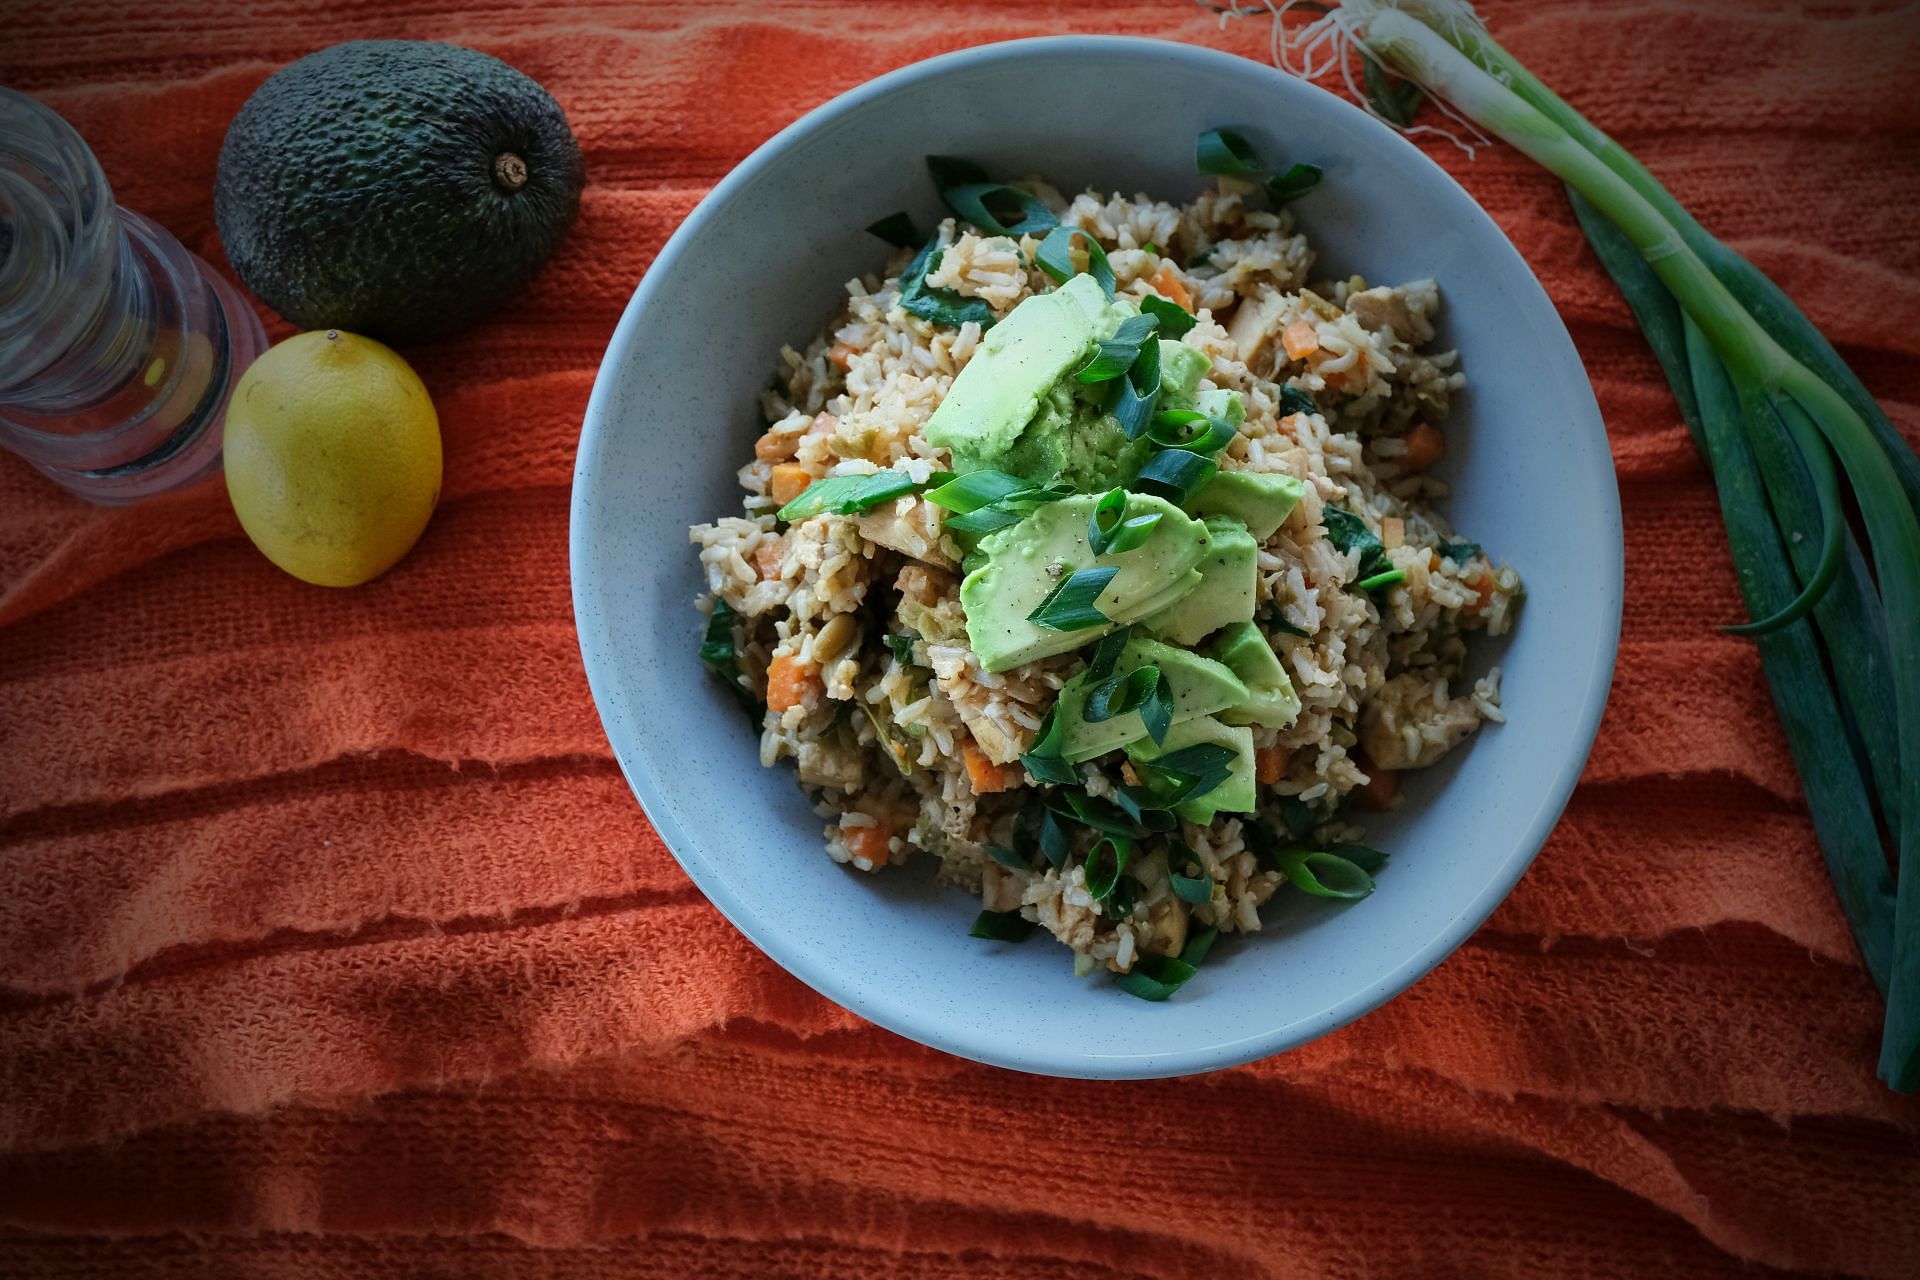 Brown rice with some tofu and avocado (Image by Rebecca Clarke/Unsplash)